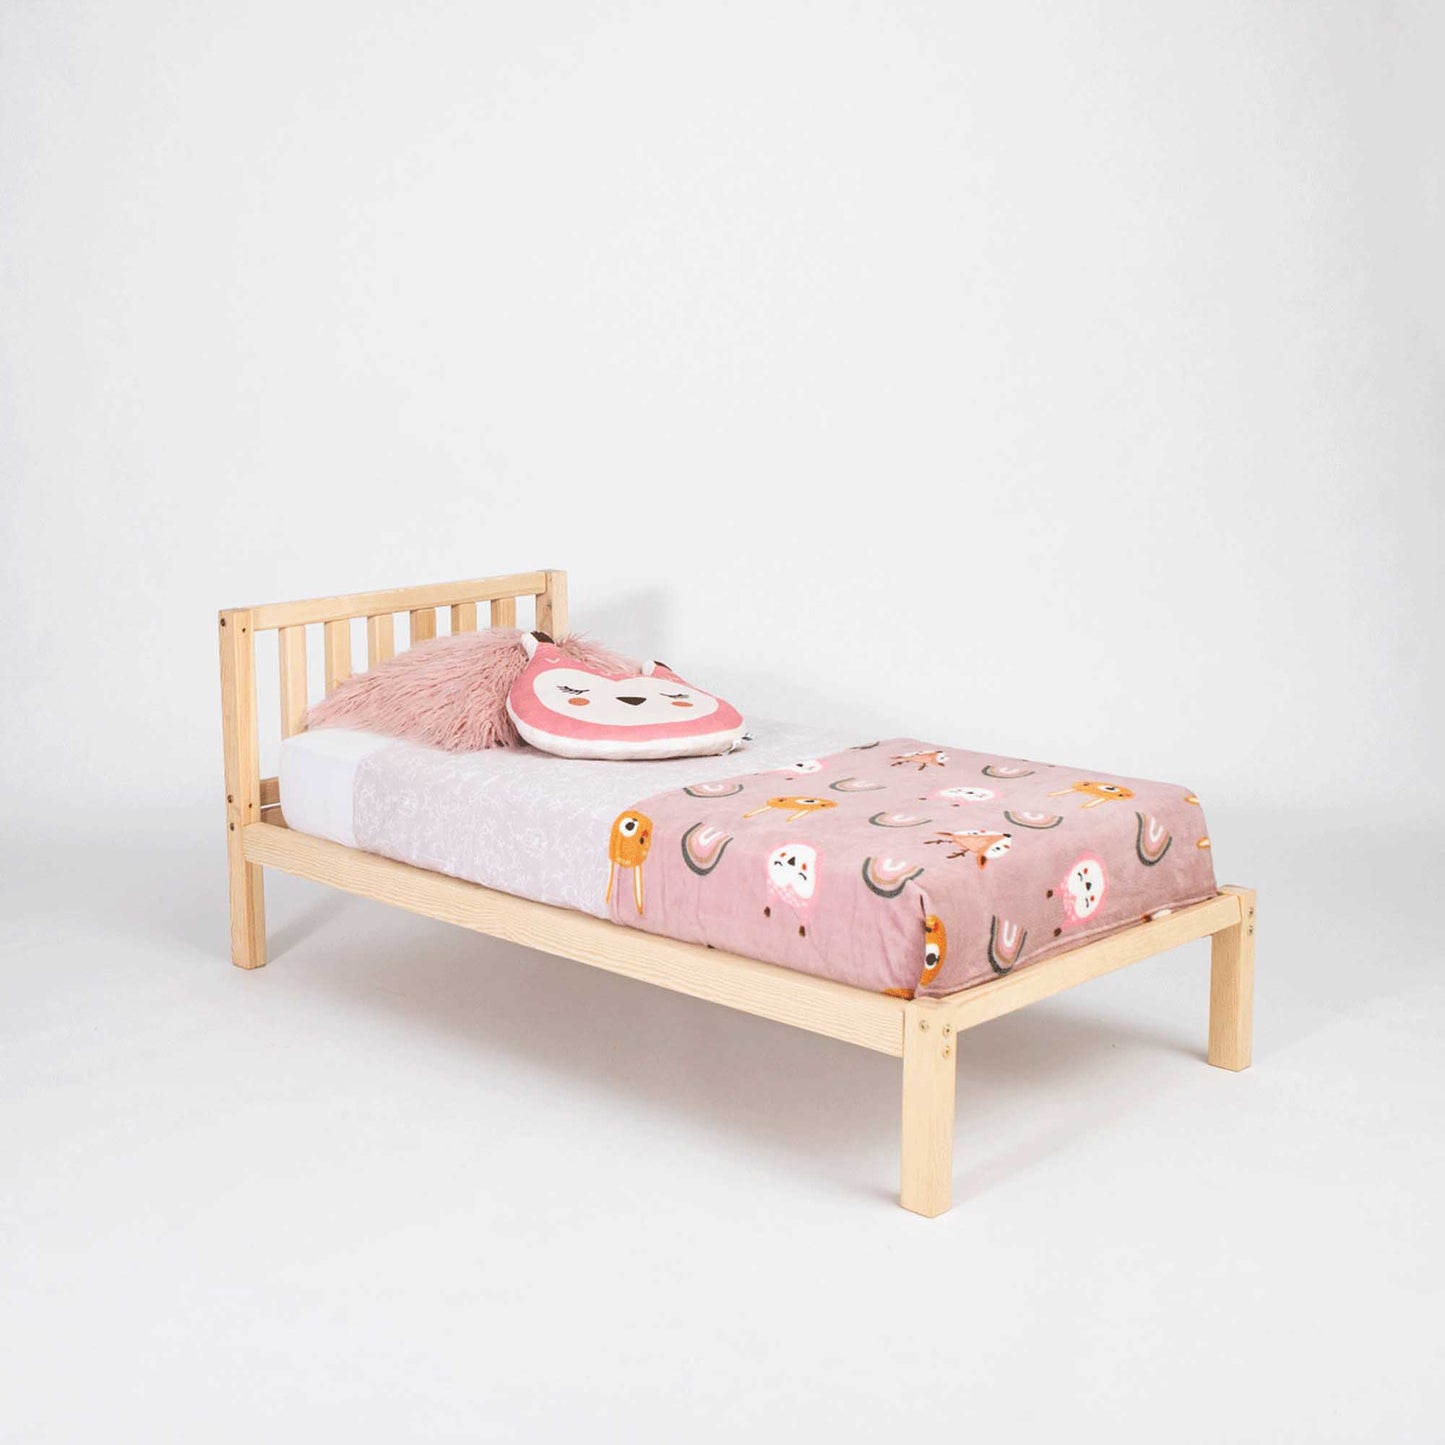 A Sweet Home From Wood Montessori-inspired solid wood children's bed with a pink and white owl blanket.